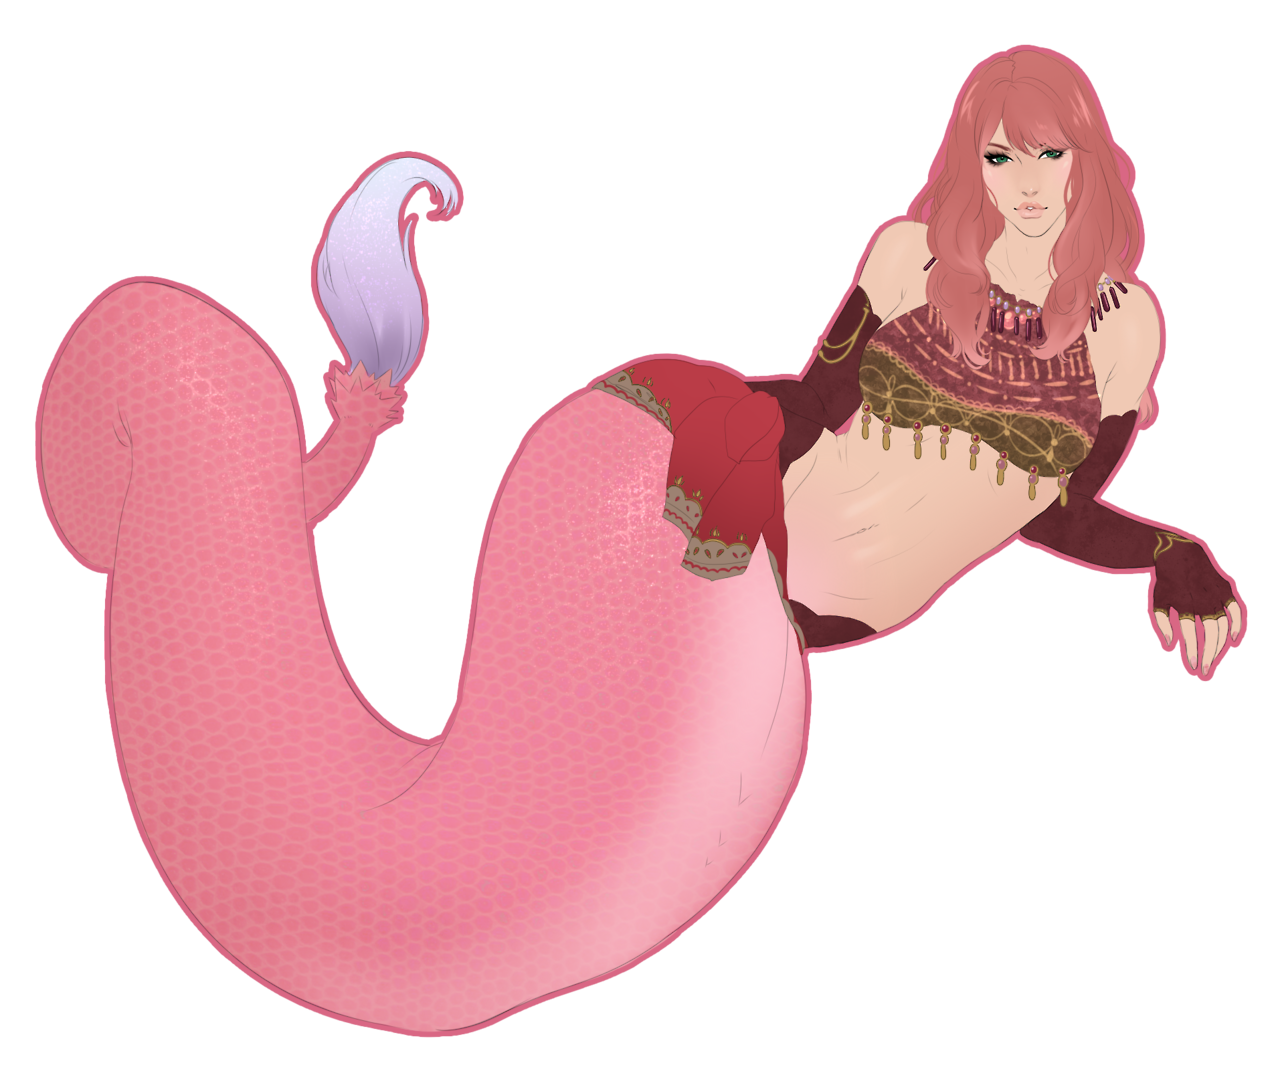 My first batch of Lamia’s! If you’ve been on the fence due to not examples here